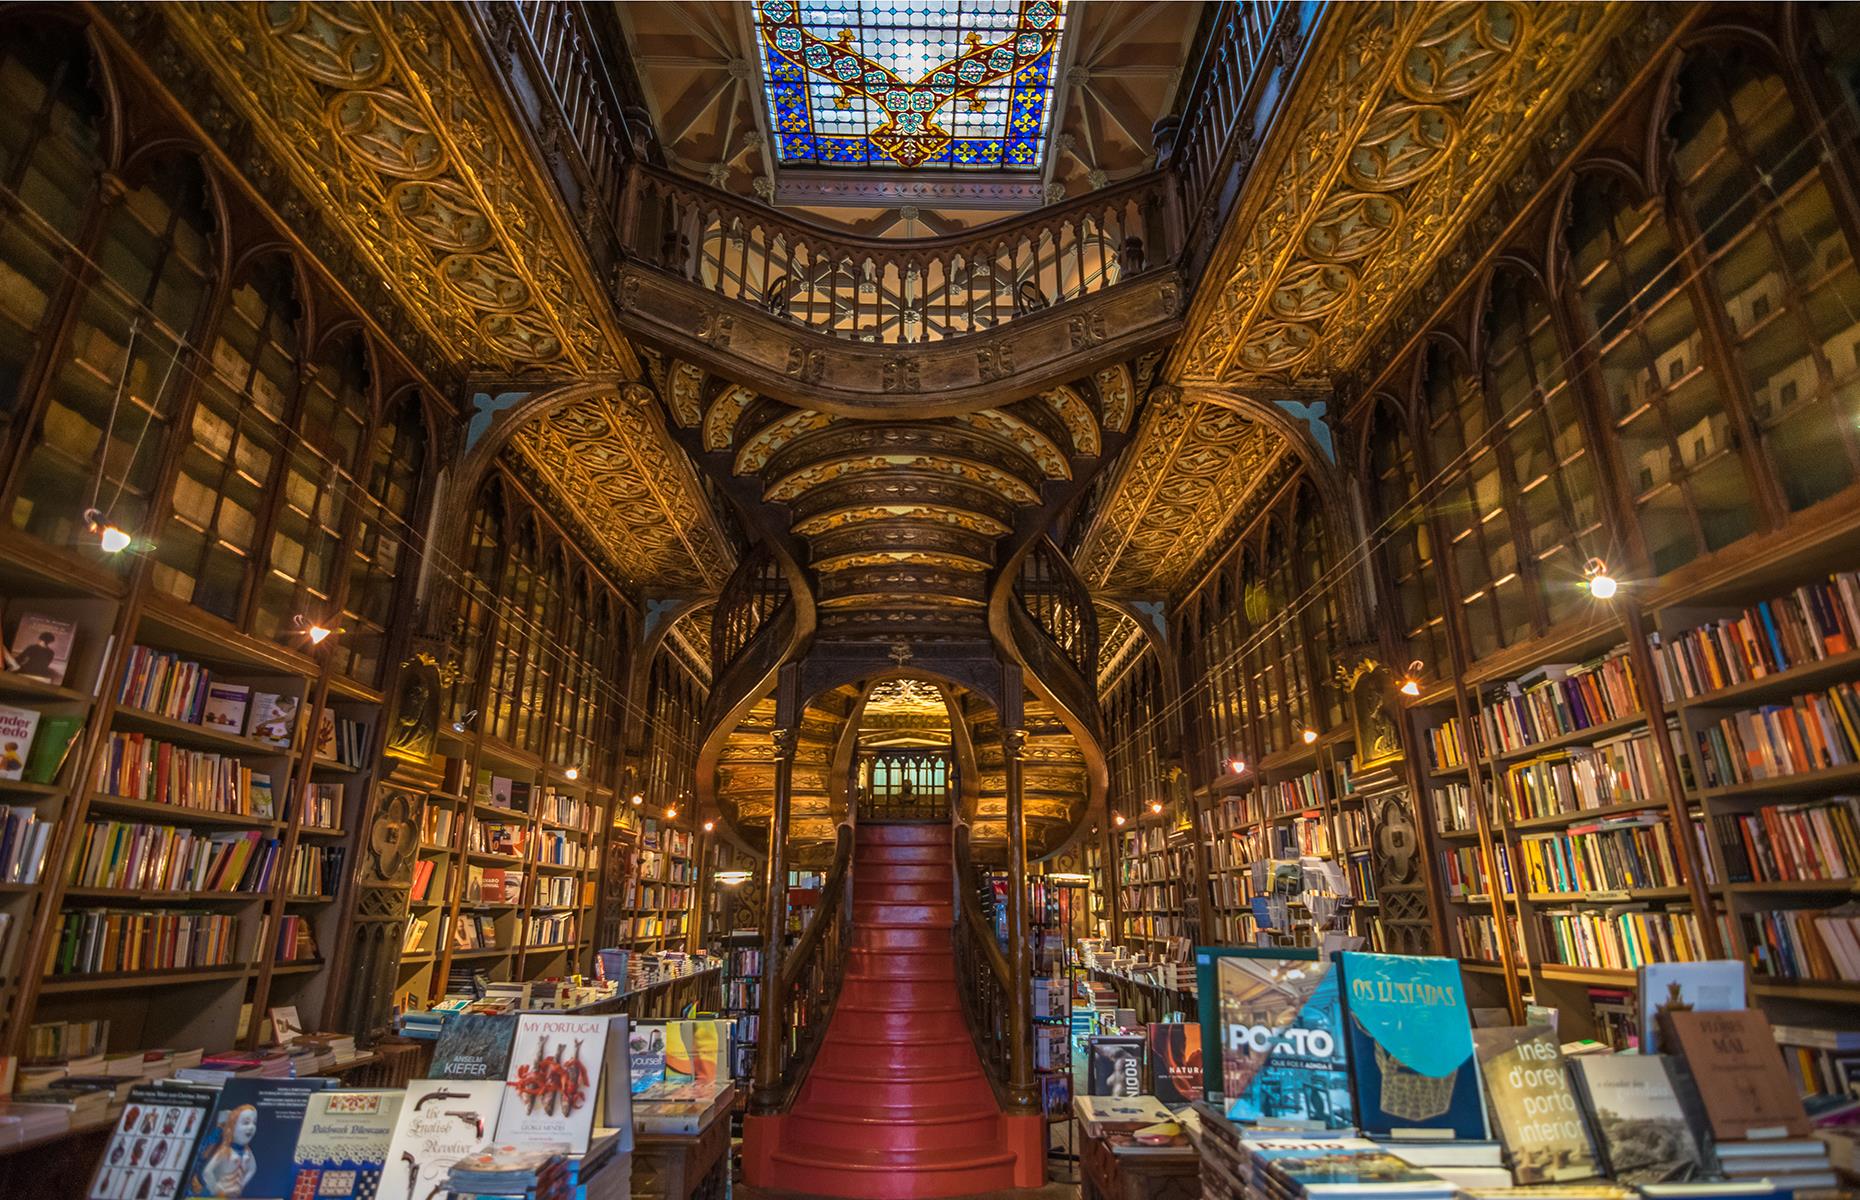 <p>With its swirling grand staircase, Gothic-style bookcases and ornate stained glass ceiling, it’s rumoured that <a href="https://www.livrarialello.pt/pt/home">Livraria Lello</a> was one of J.K Rowling’s inspirations for the Hogwarts Library in the <em>Harry Potter</em> series. Be wowed by its awe-inspiring interior, then pick up some copies from the library's specially-curated children's collection: books like <em>Alice in Wonderland</em> and <em>The Wizard of Oz</em> have been brought to life by local illustrators.</p>